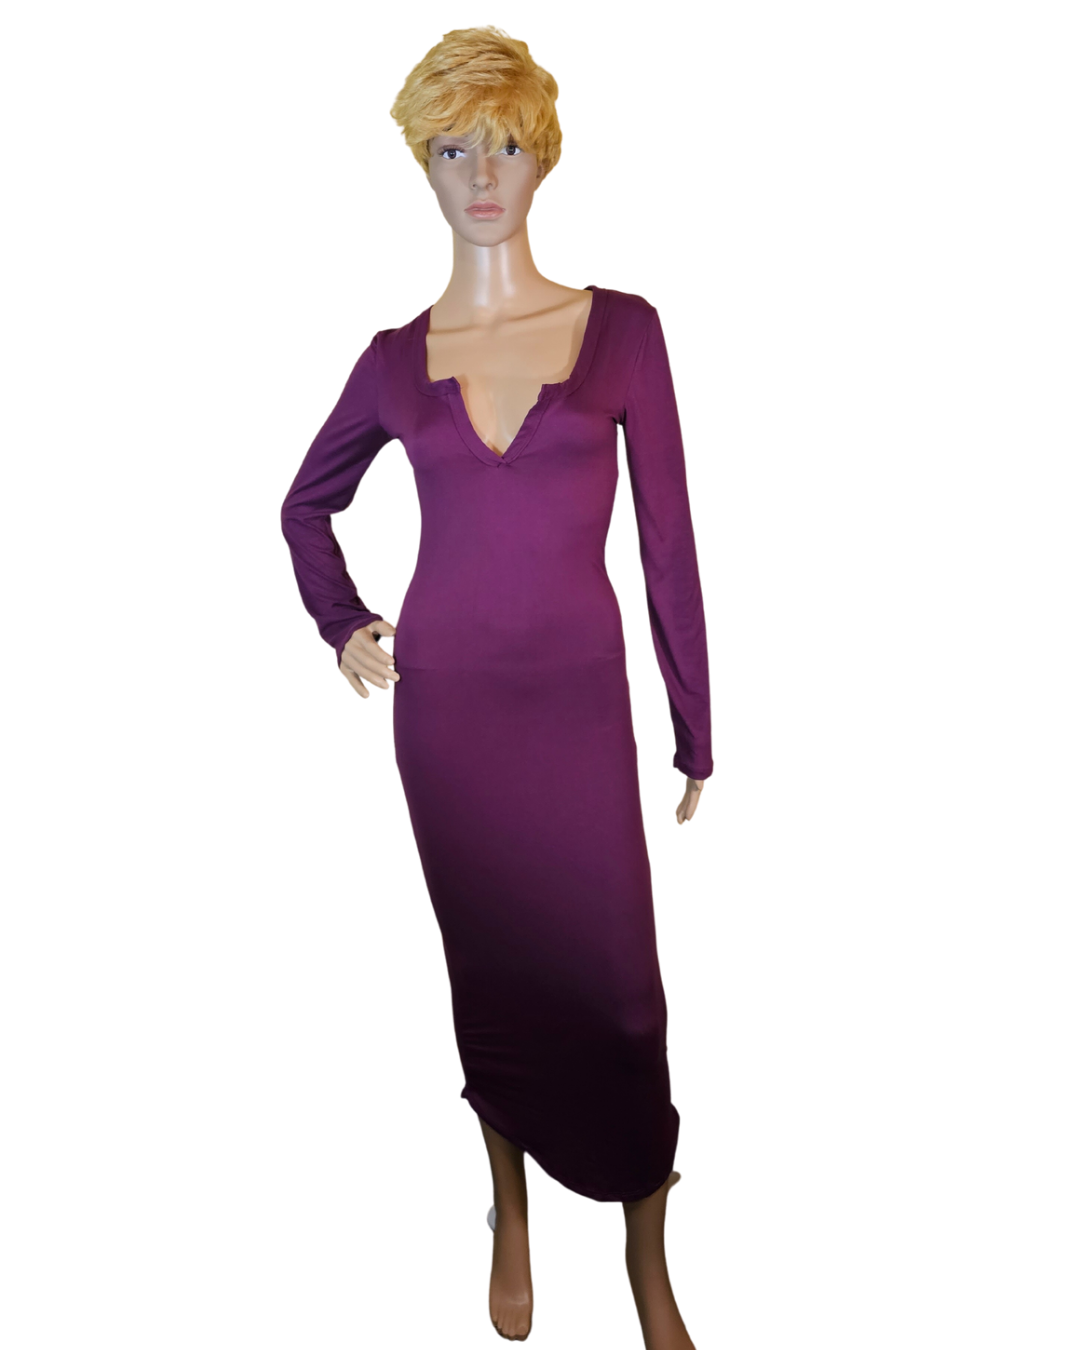 small-large, purple soft material dress that fits your curves and has a v-neck in the front. the dress goes pass your knees. long sleeves